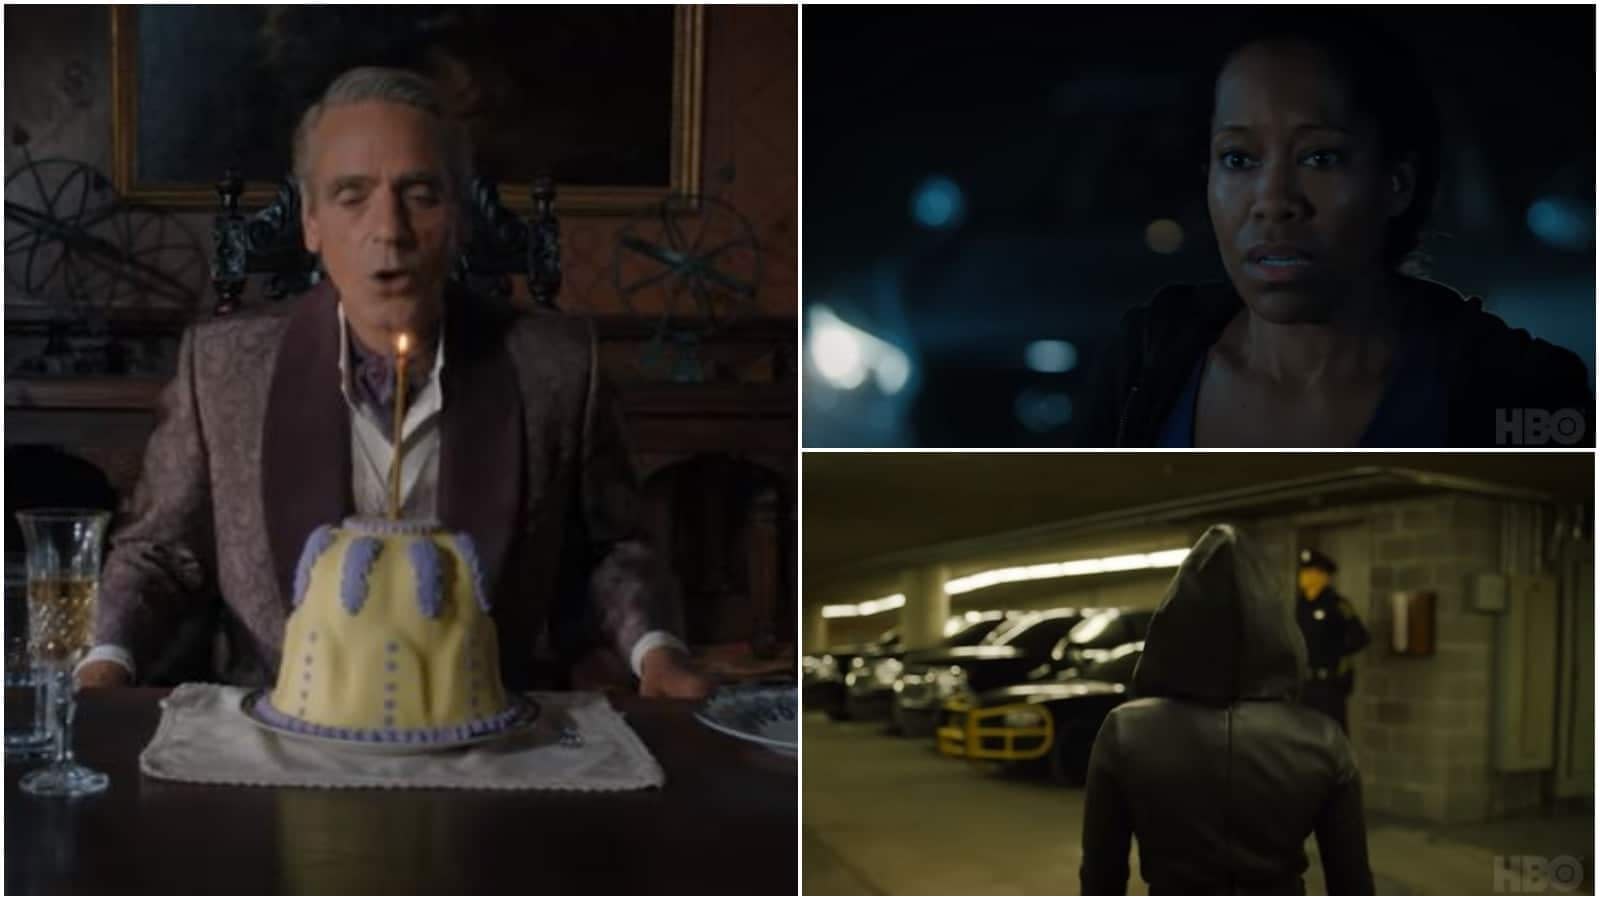 'Watchmen': Jeremy Irons Blows Out Candle on Interesting Cake, Regina King Looks Concerned, and More [VIDEO]